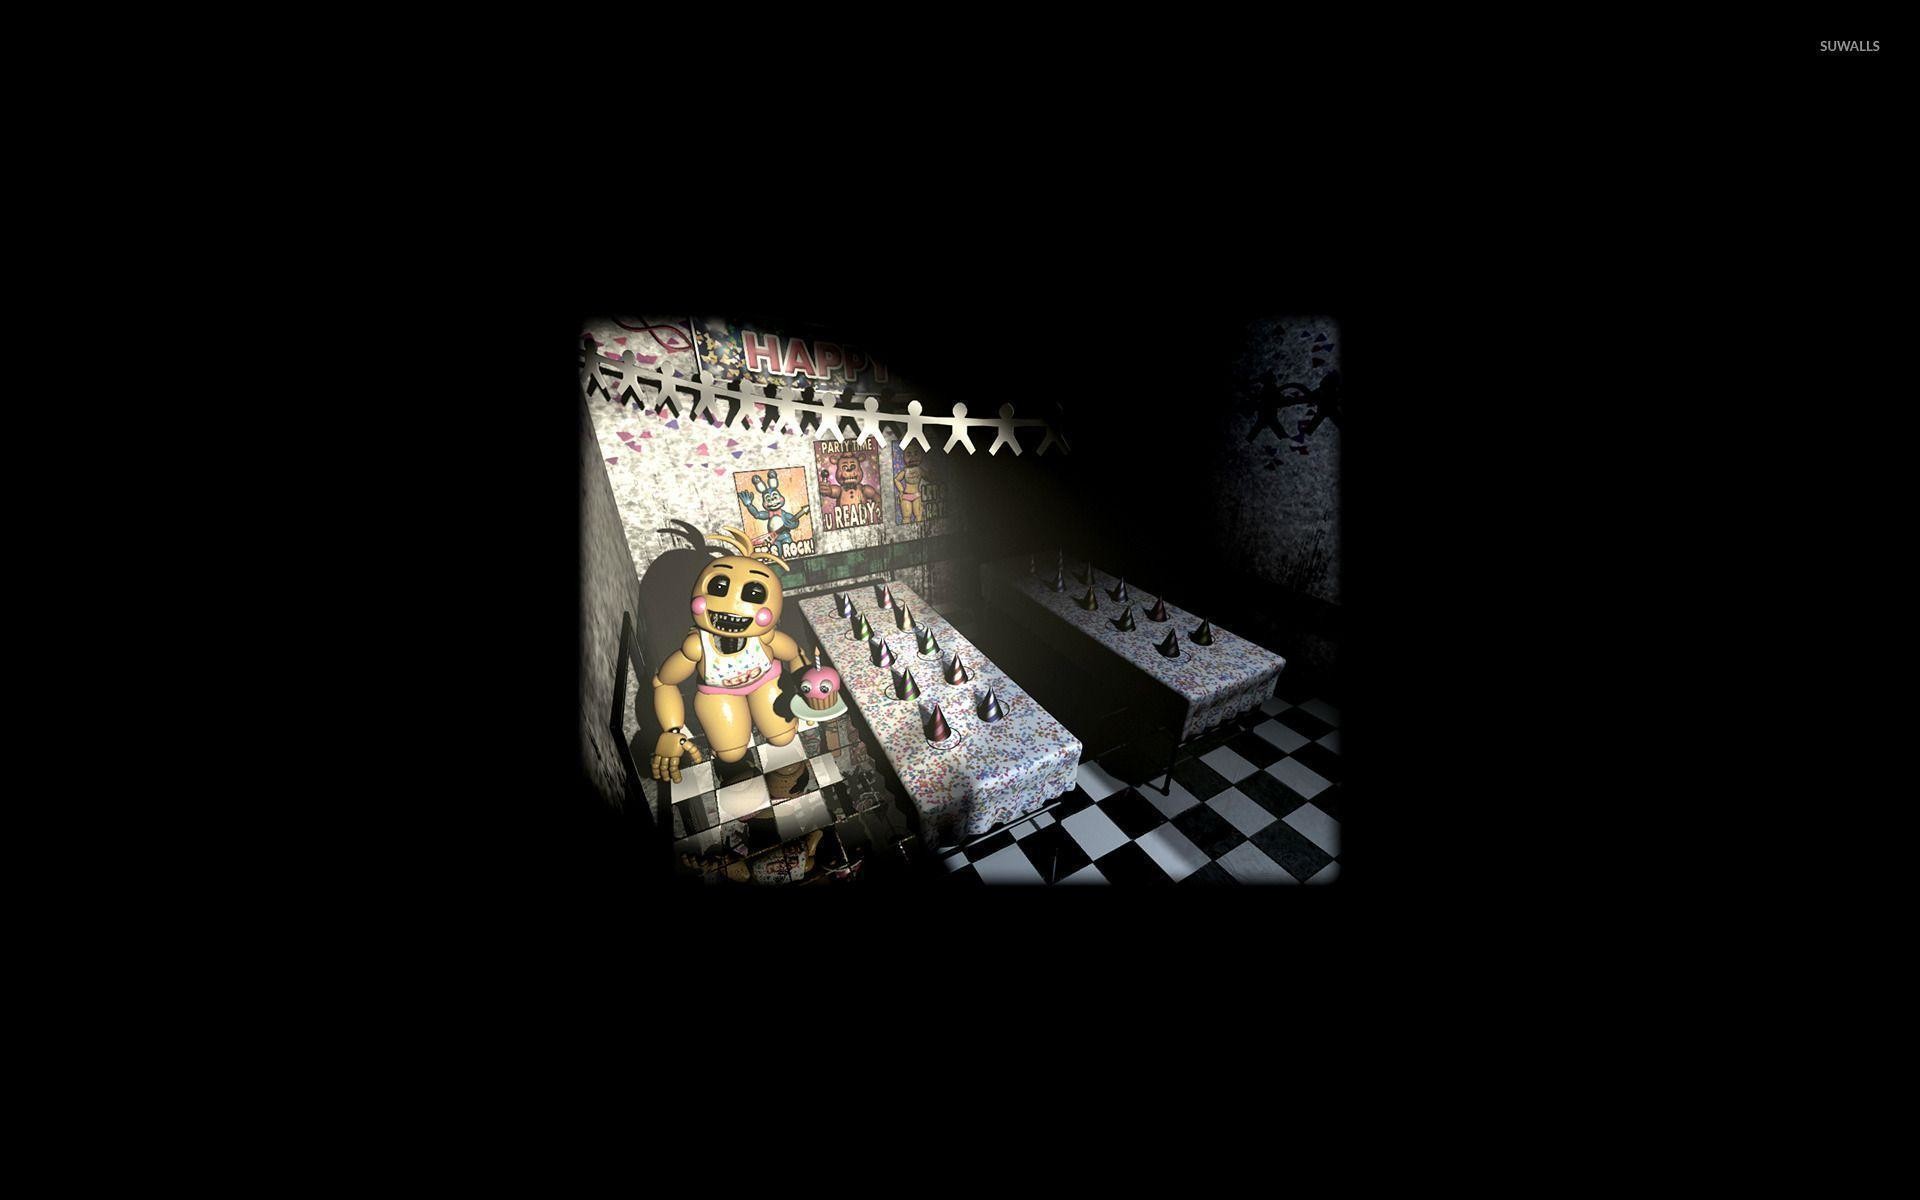 Five Nights at Freddys wallpaper – Game wallpapers